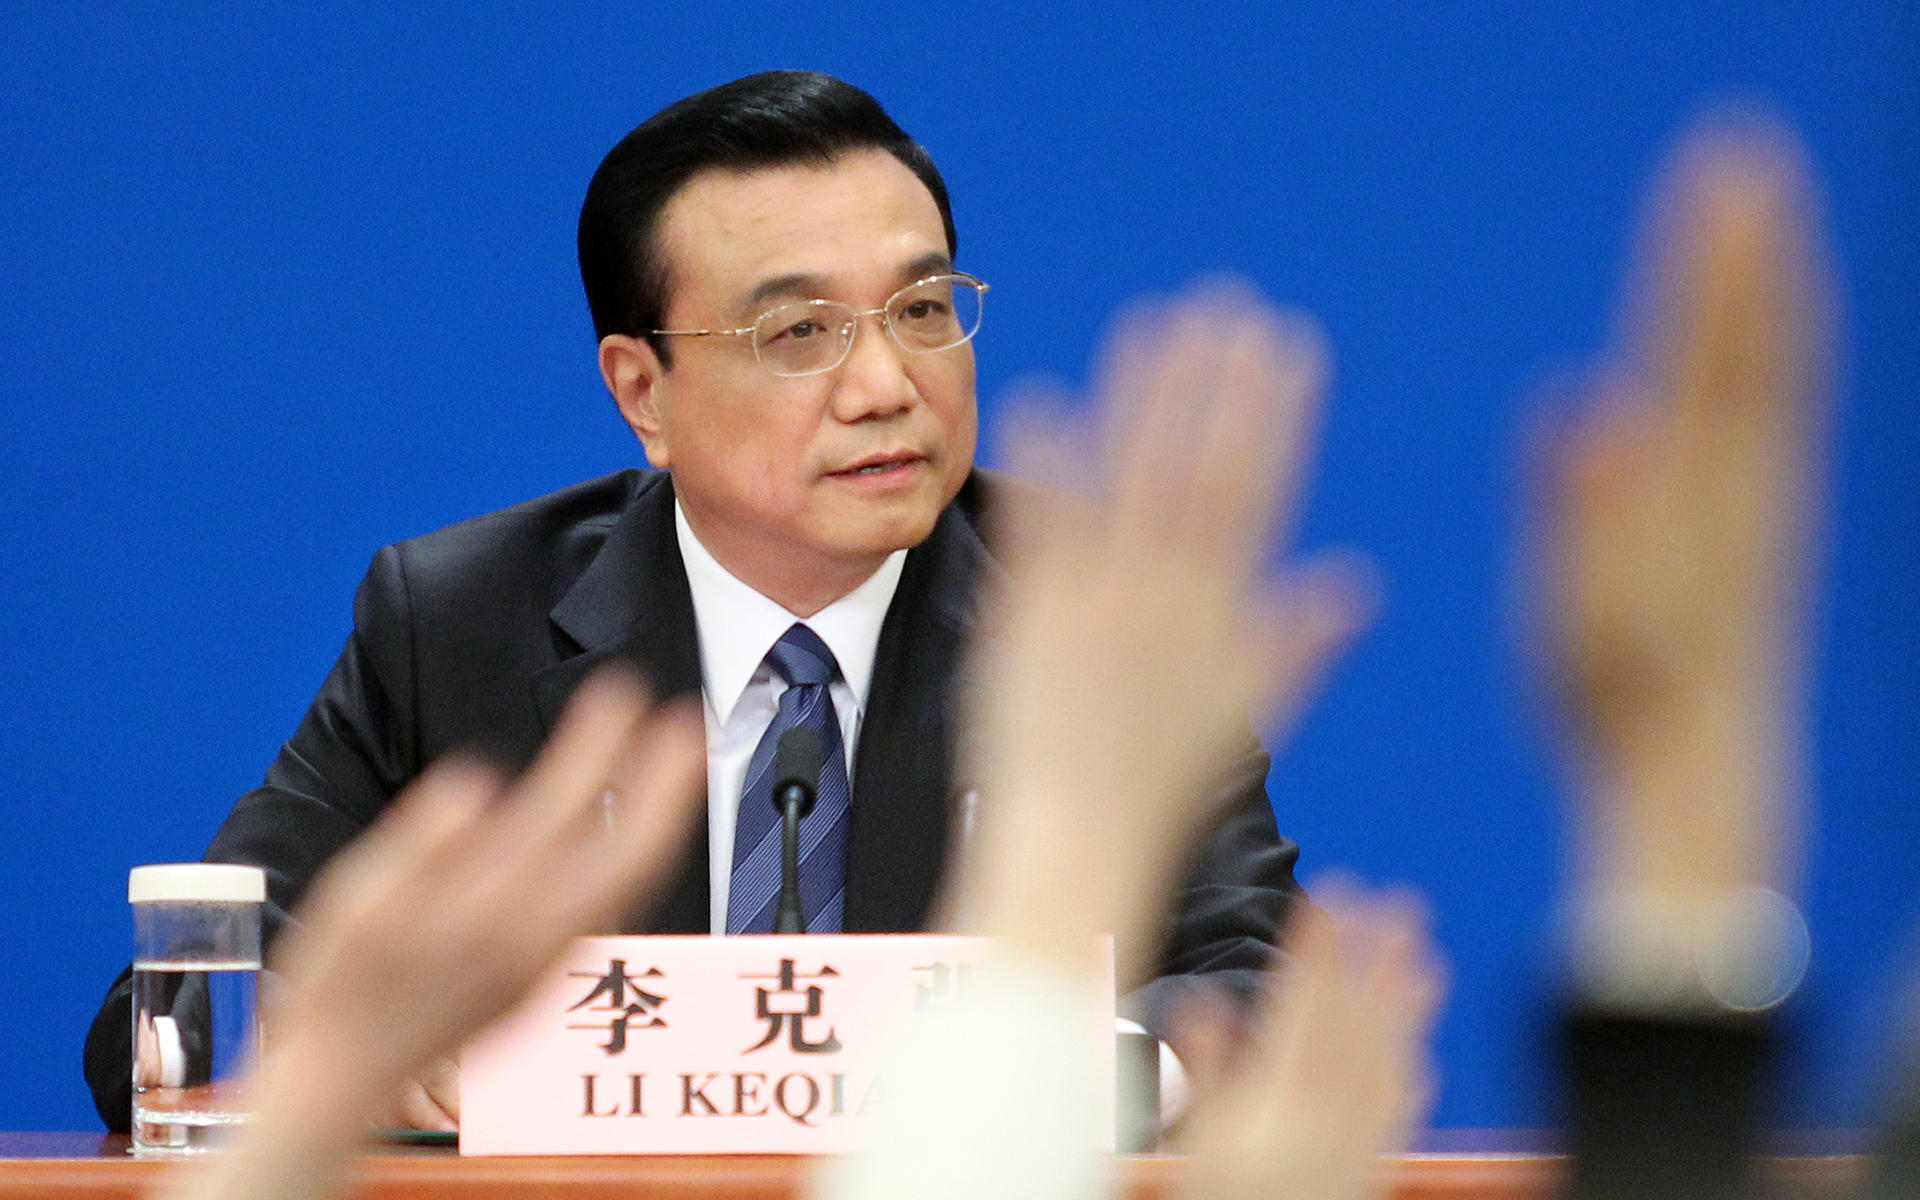 Li Keqiang speaks at the press conference. 